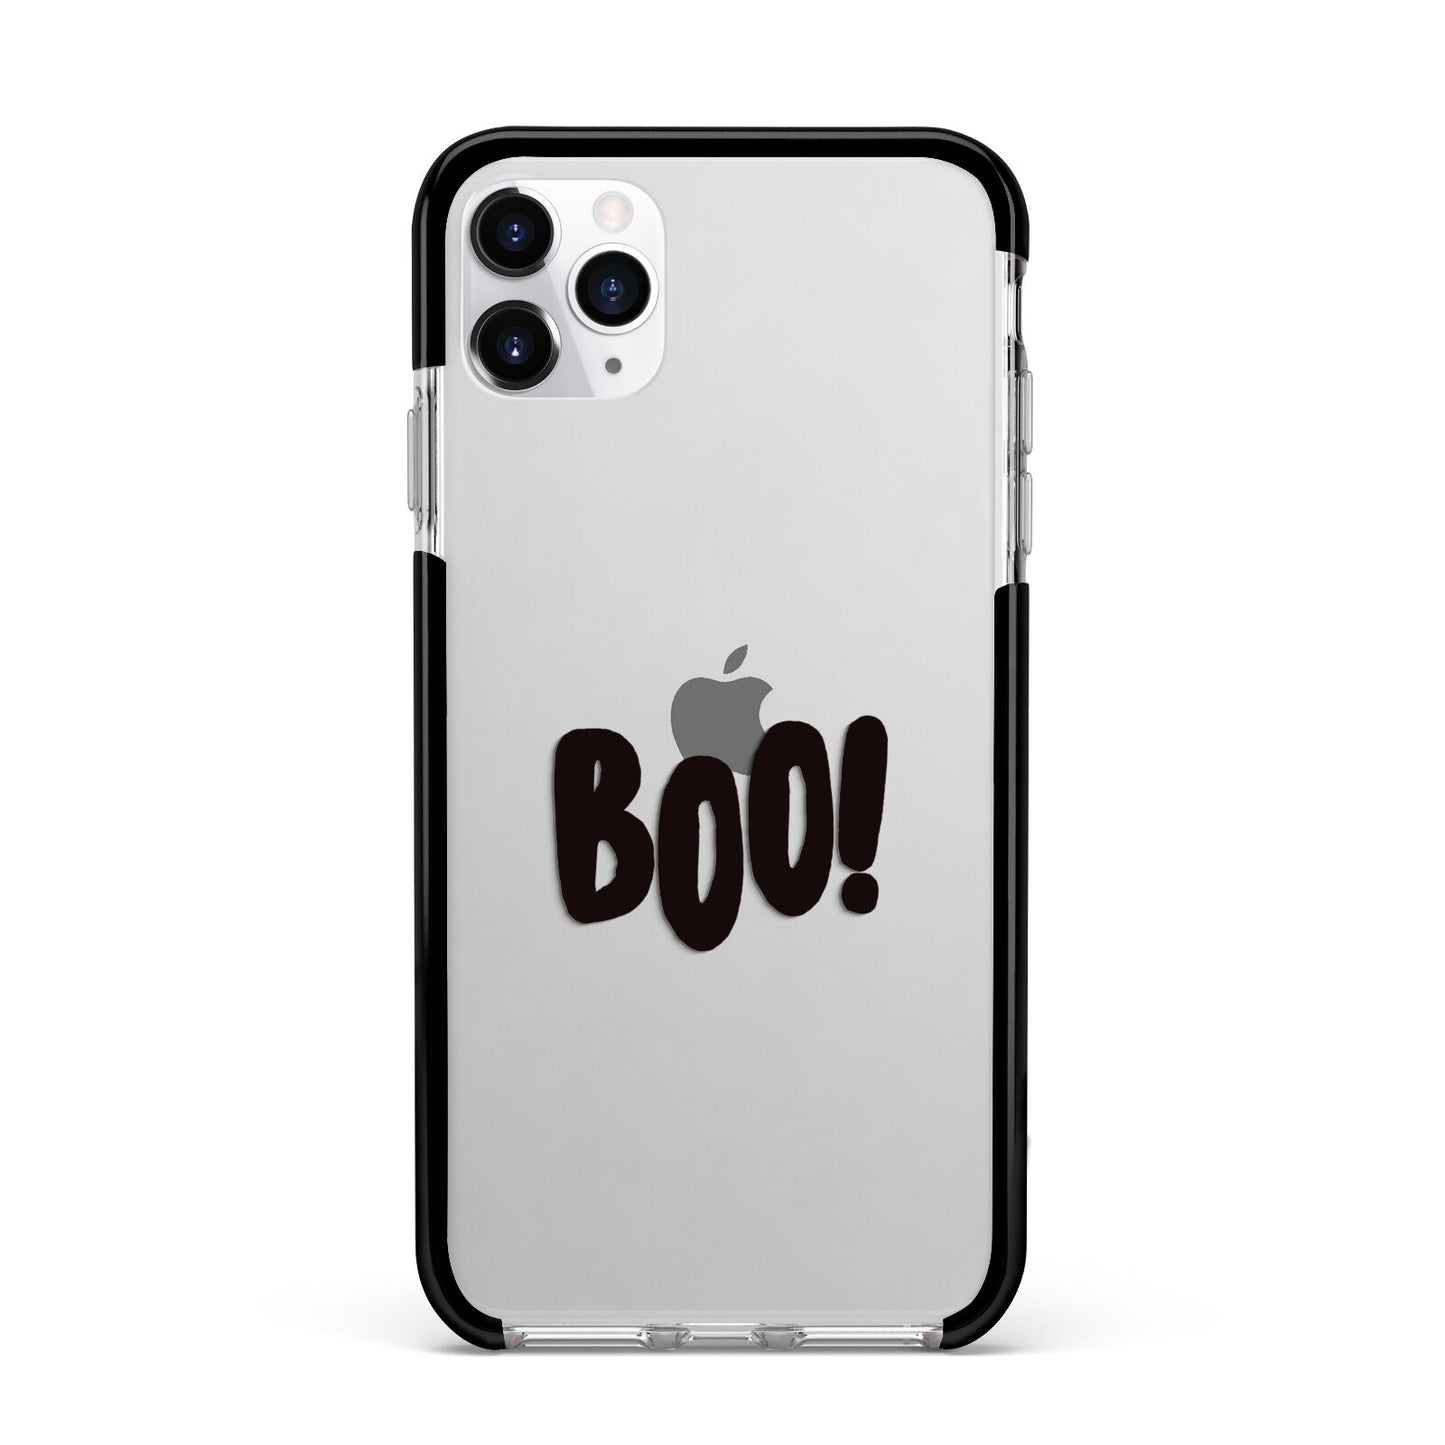 Boo Black Apple iPhone 11 Pro Max in Silver with Black Impact Case